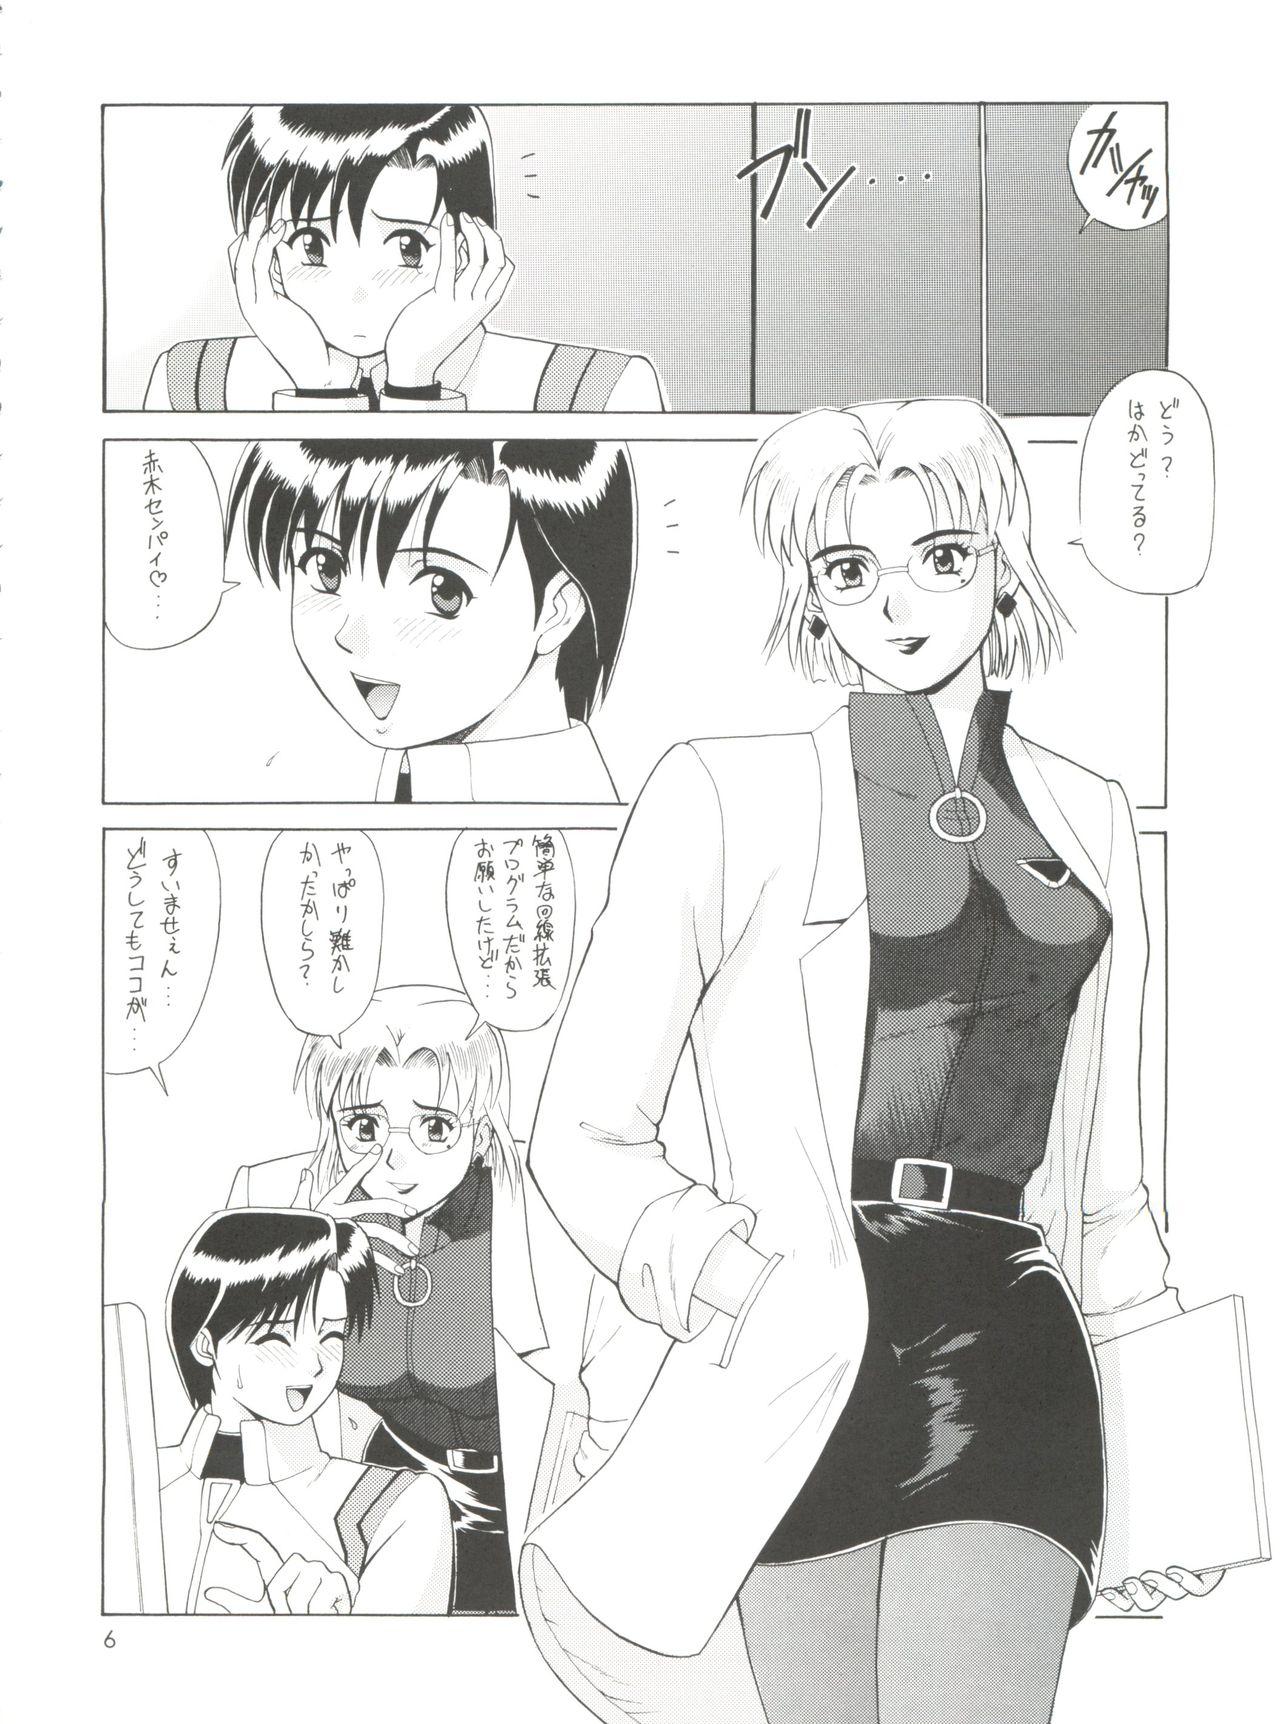 Officesex Suite For My Sweet Shinteiban - Neon genesis evangelion Self - Page 5